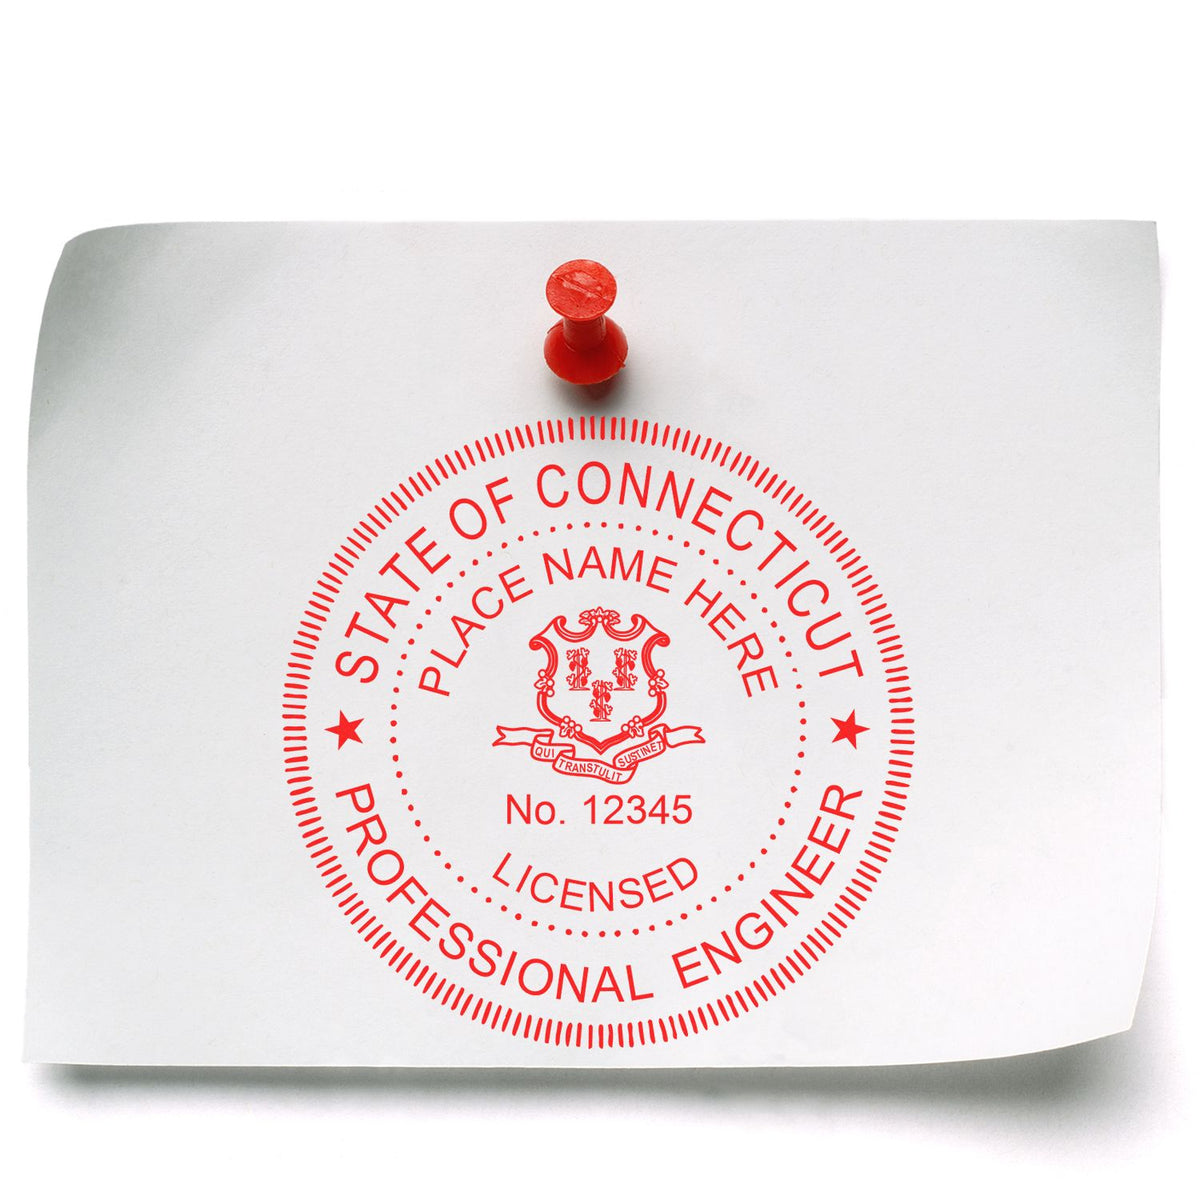 A photograph of the Slim Pre-Inked Connecticut Professional Engineer Seal Stamp stamp impression reveals a vivid, professional image of the on paper.